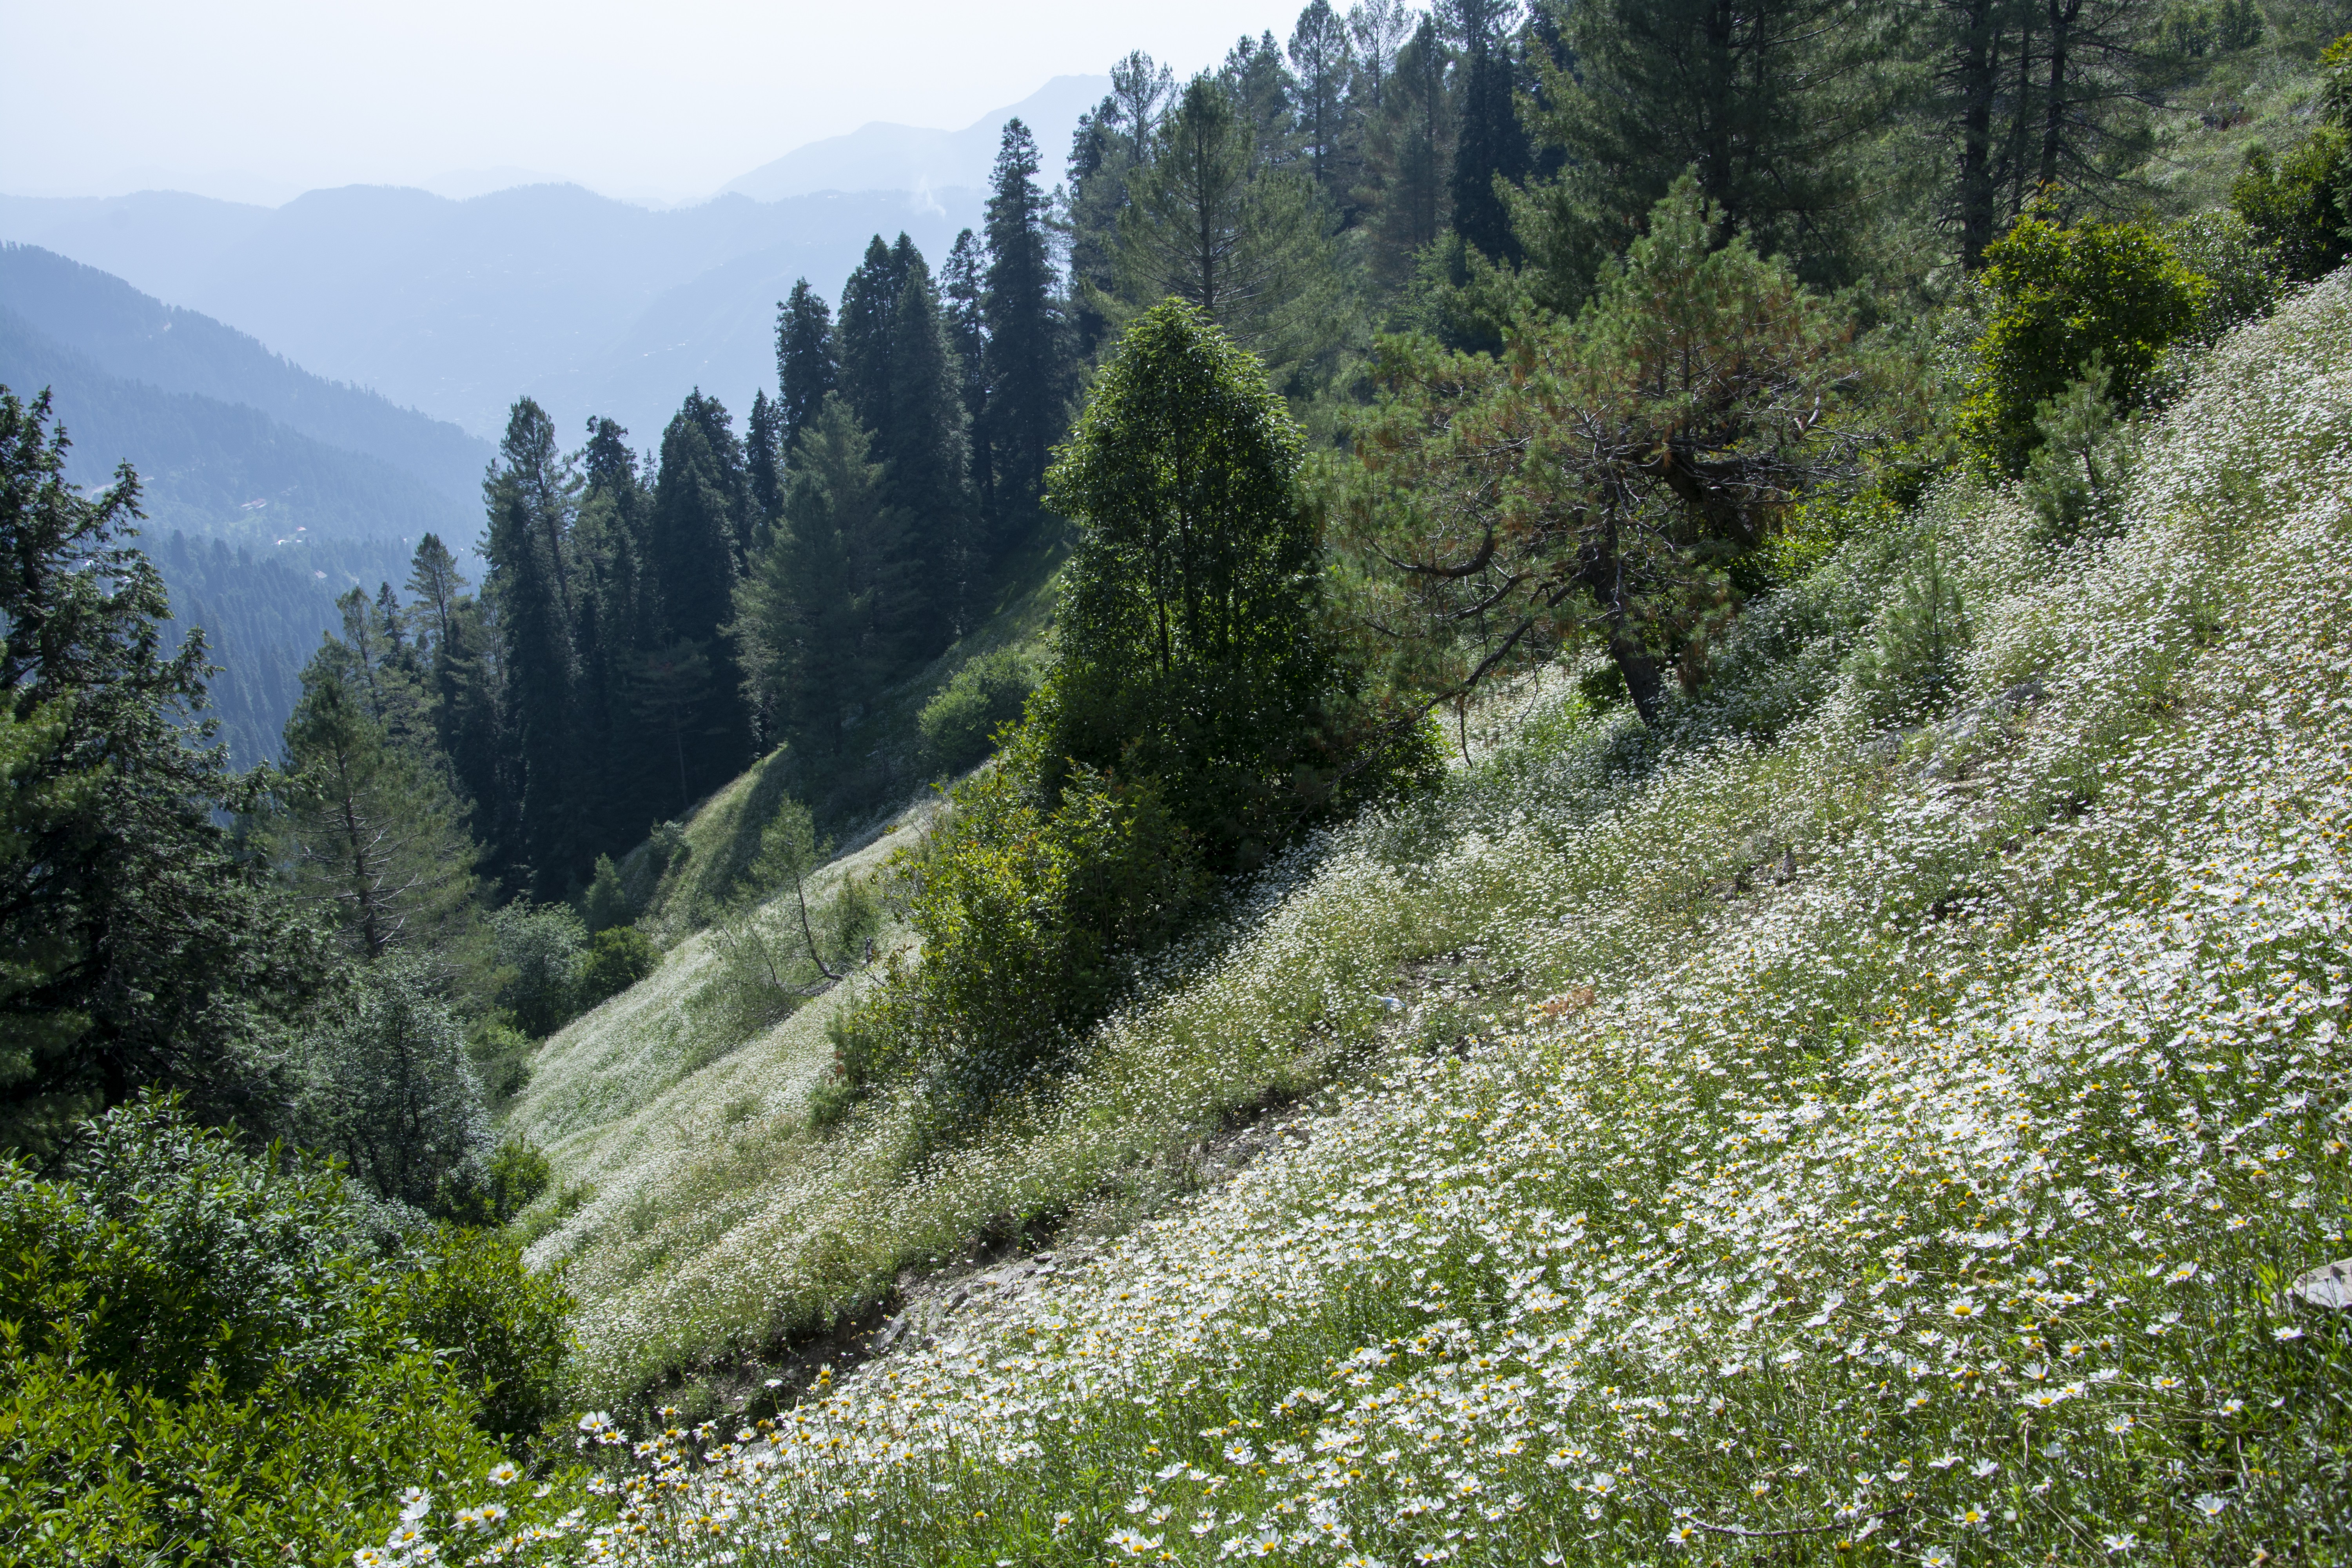 The scenic beauty of Ayubia with the ground covered with white flowers